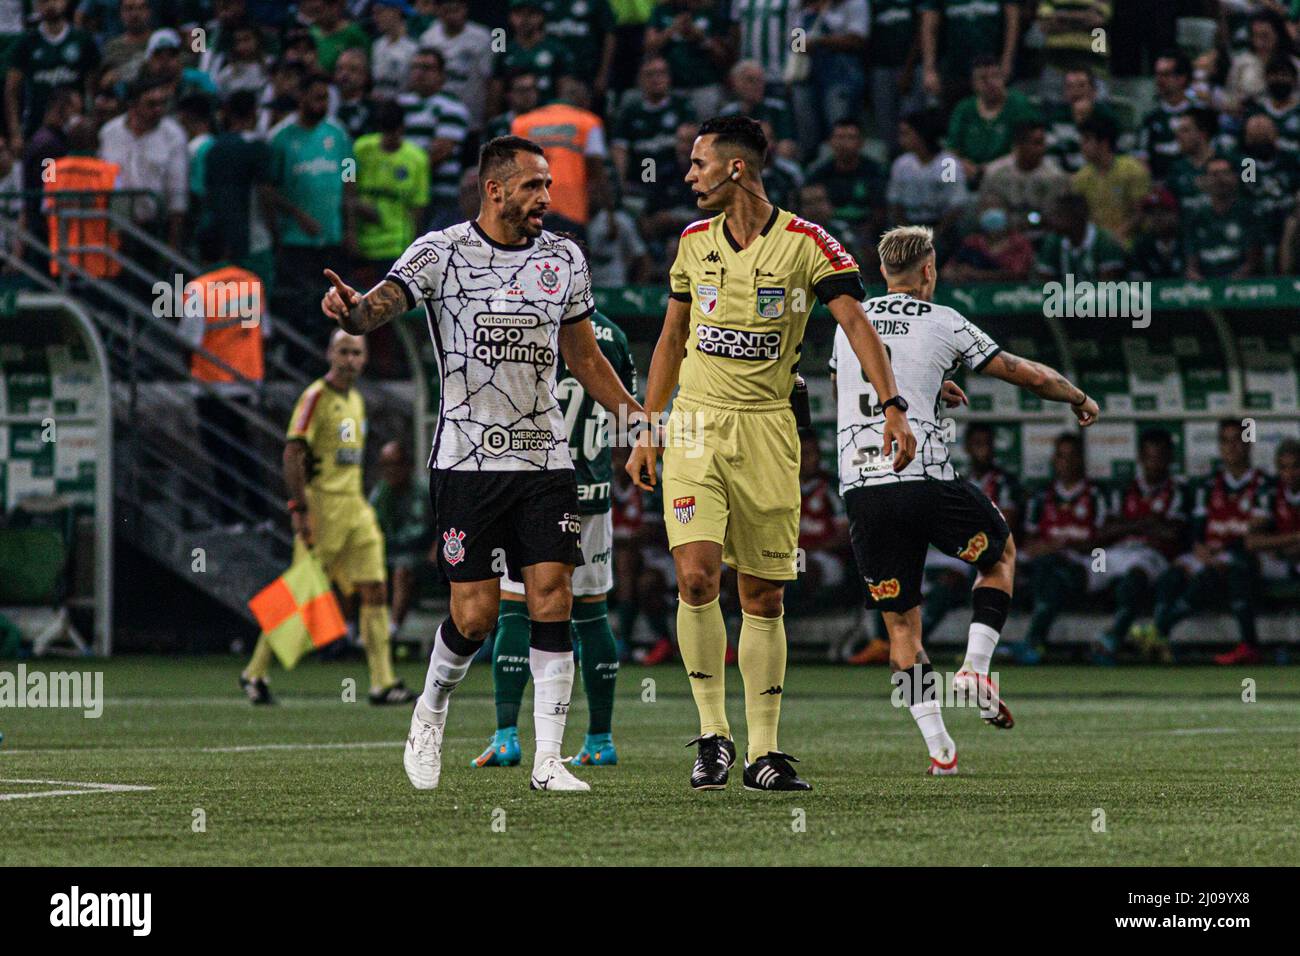 SÃO PAULO, SP - 17.03.2022: PALMEIRAS X CORINTHIANS - Gustavo Gómez in the  match between Palmeiras X Corinthians, valid for the 6th round (delayed) of  the 2022 Campeonato Paulista, held at the